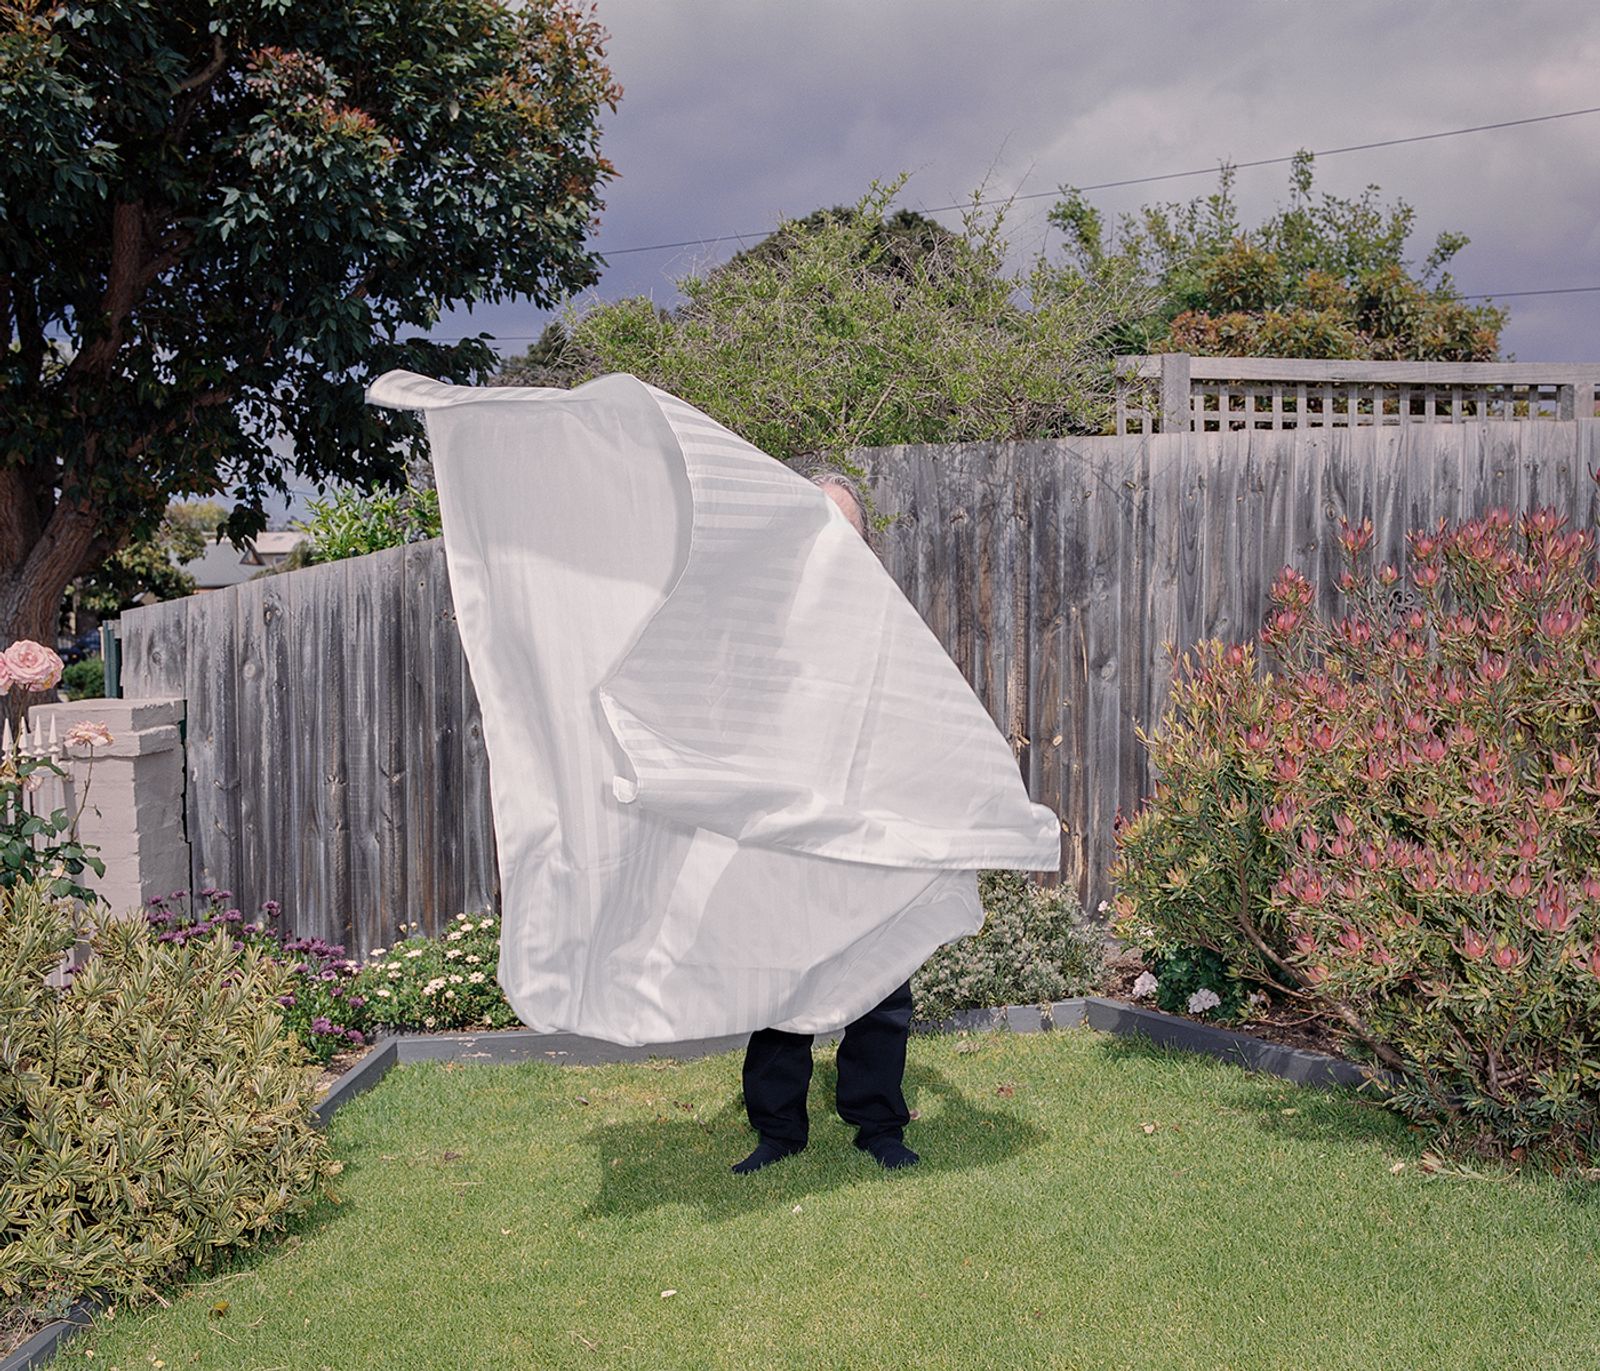 Using Performative Photography, Meg De Young Redefines The Relationships With Her Mother